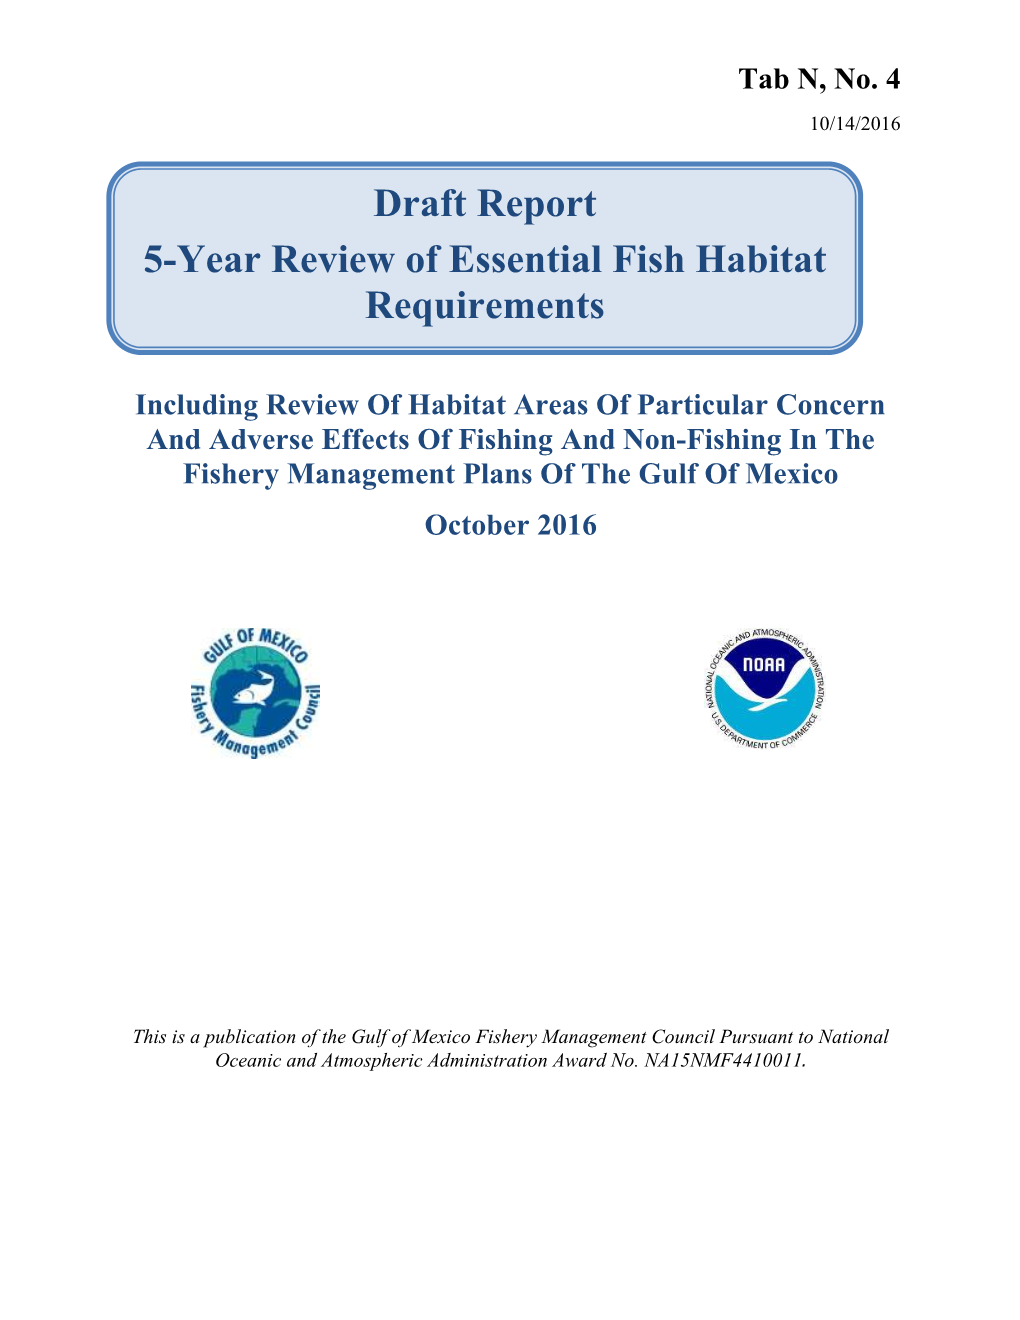 Draft Report 5-Year Review of Essential Fish Habitat Requirements